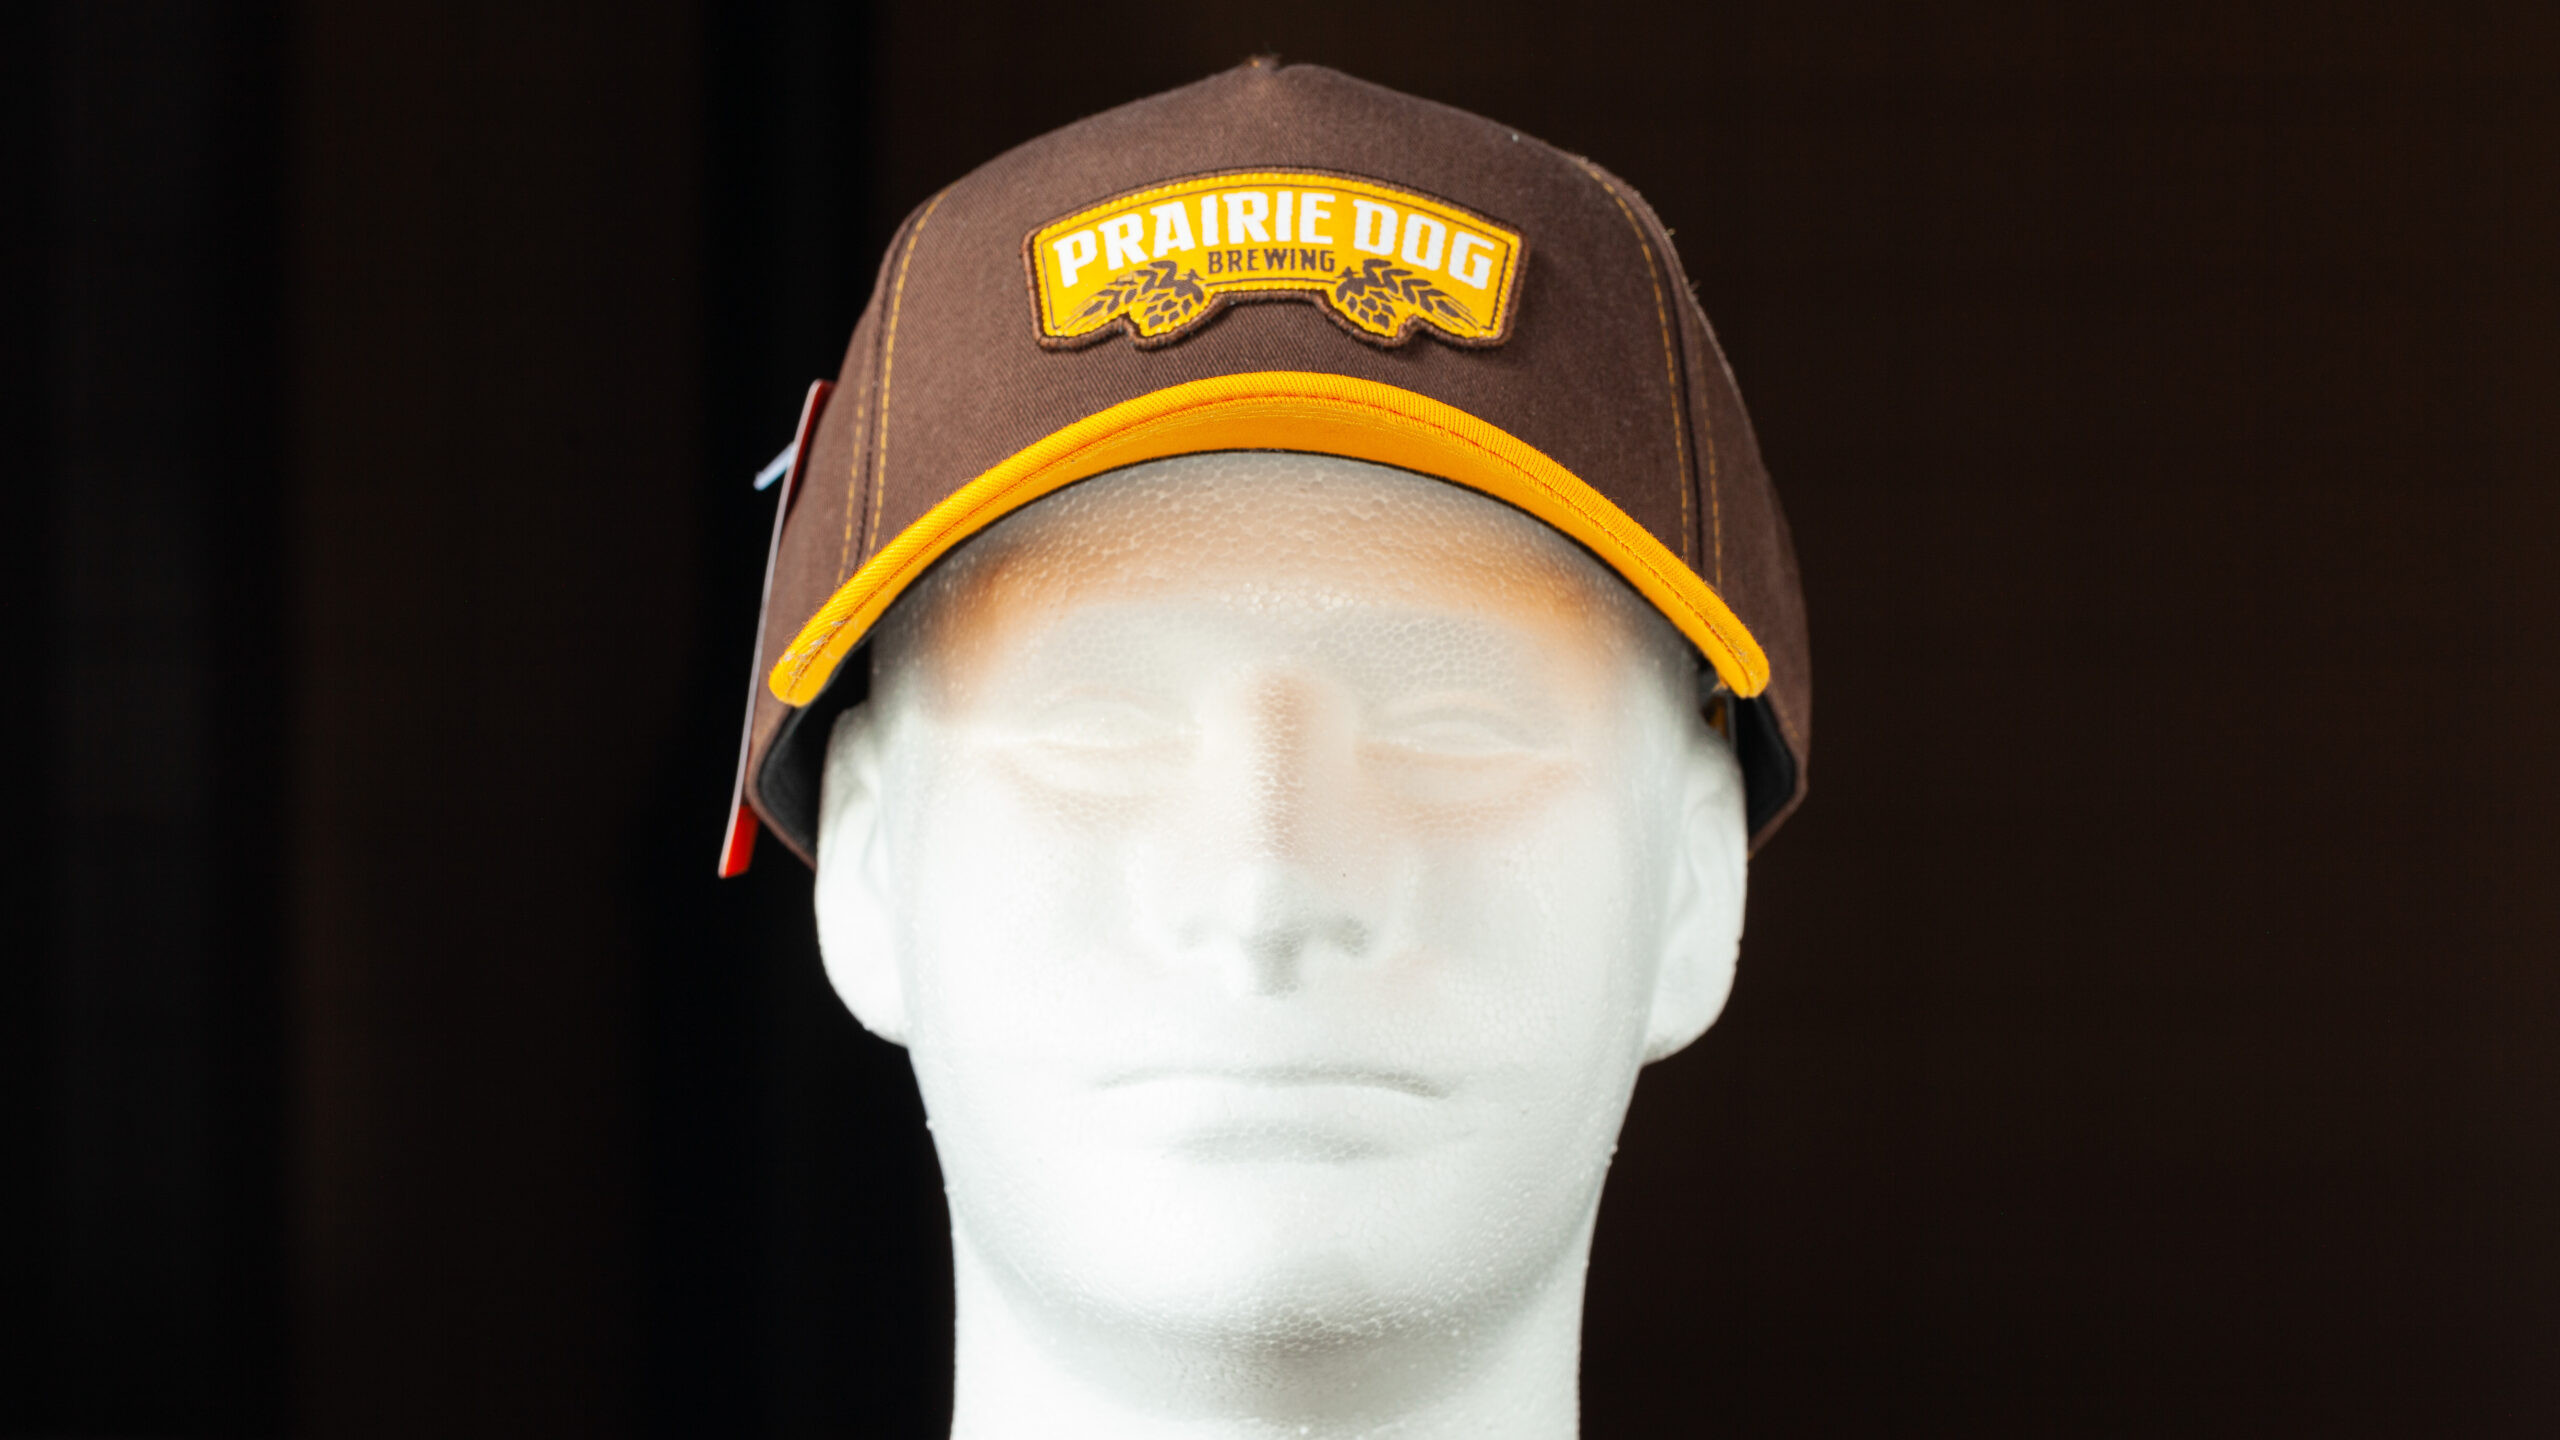 This Prairie Dog® Brewing hat is the perfect addition to any outfit (we think it may even jazz up a suit and tie!. The earth tones are reminiscent of the prairie lands and ingredients used to make the craft beer we all know and love while the slogan gives a nod to your favourite local brewery and lets everyone know what you like.